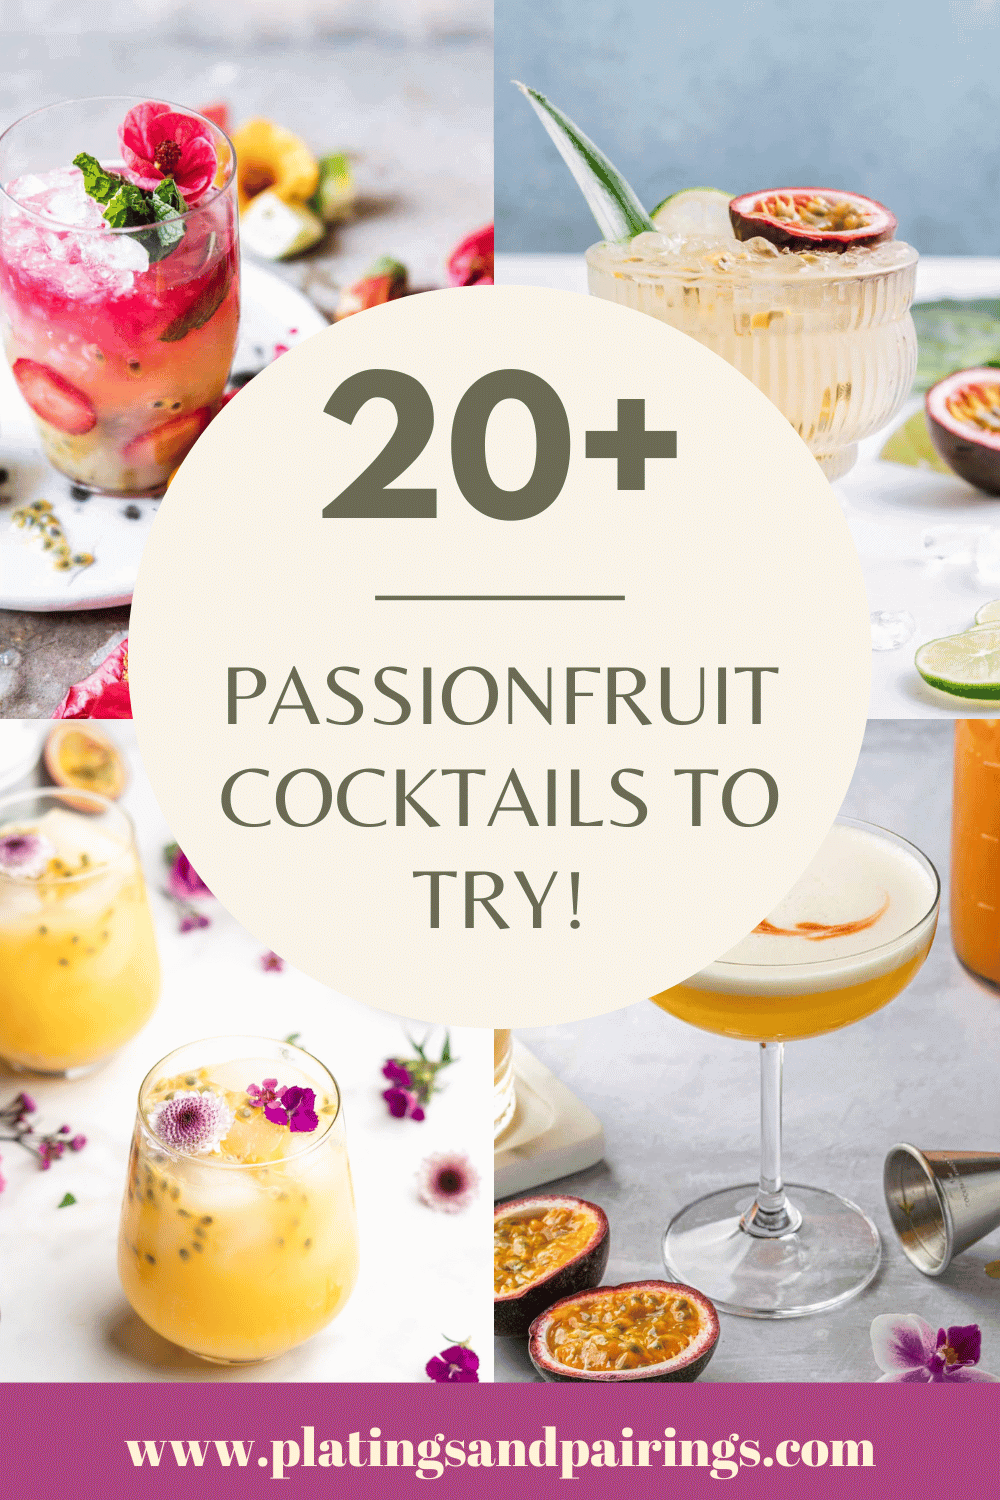 Collage of passion fruit cocktails with text overlay.